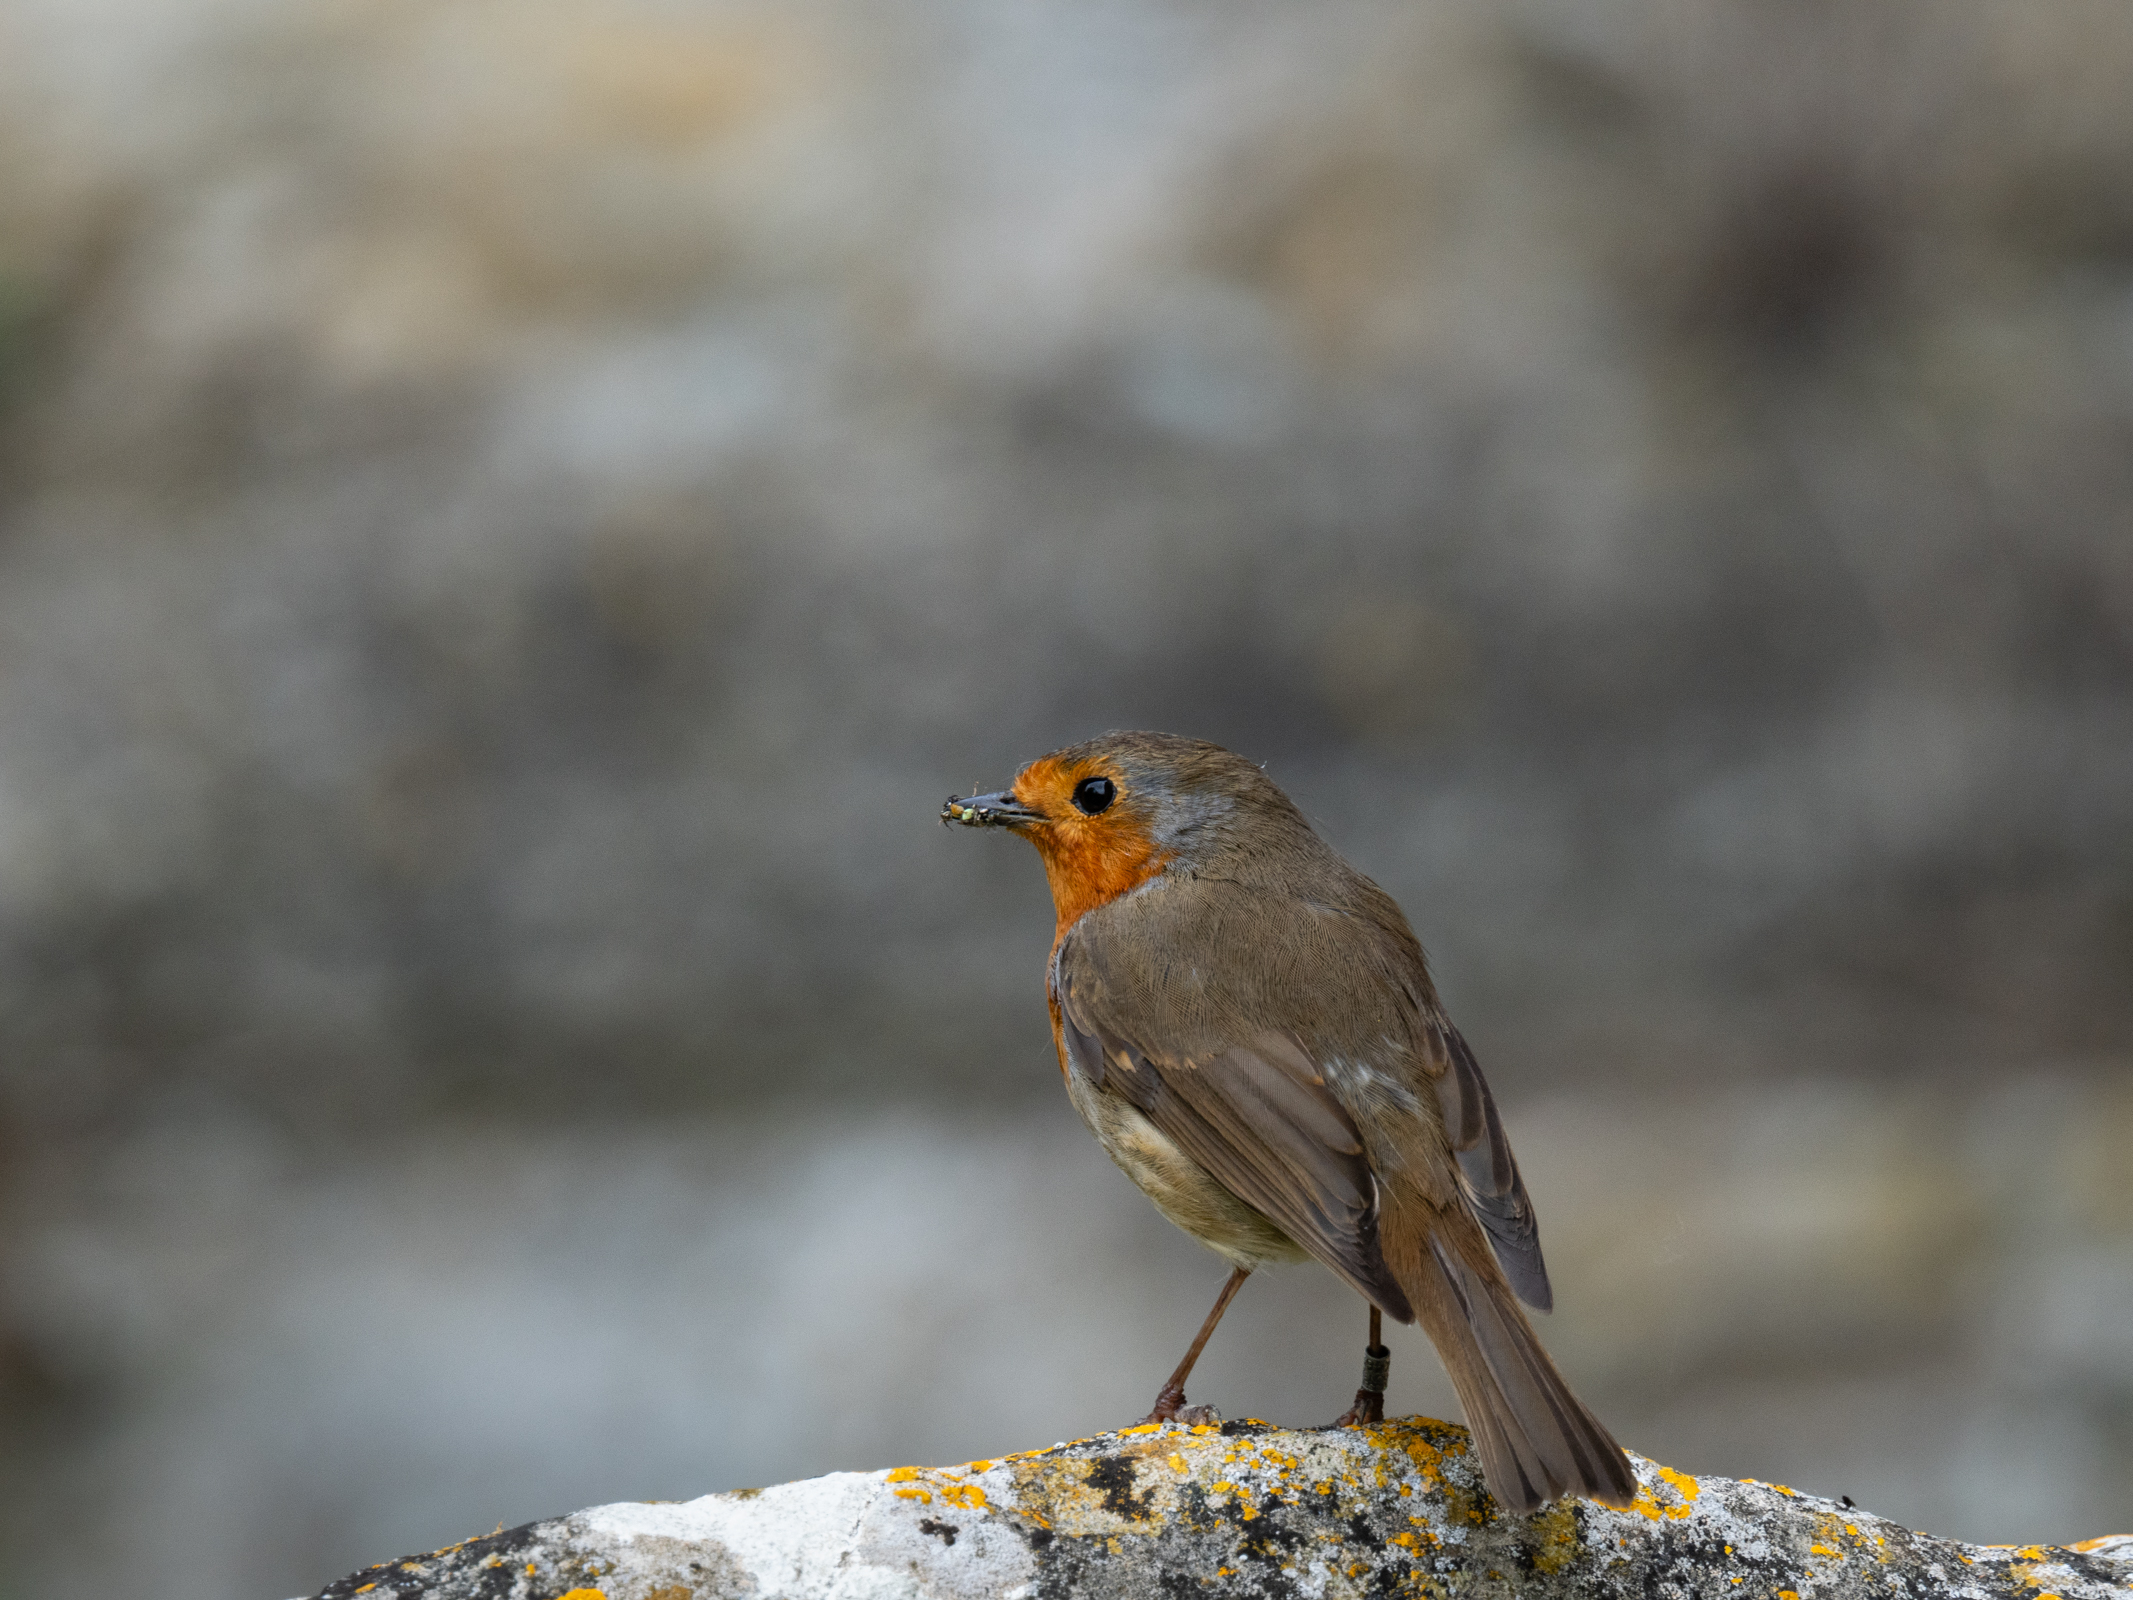 Photo of a robin taken with the OM System M.Zuiko Digital 150-600mm F5.0-6.3 IS